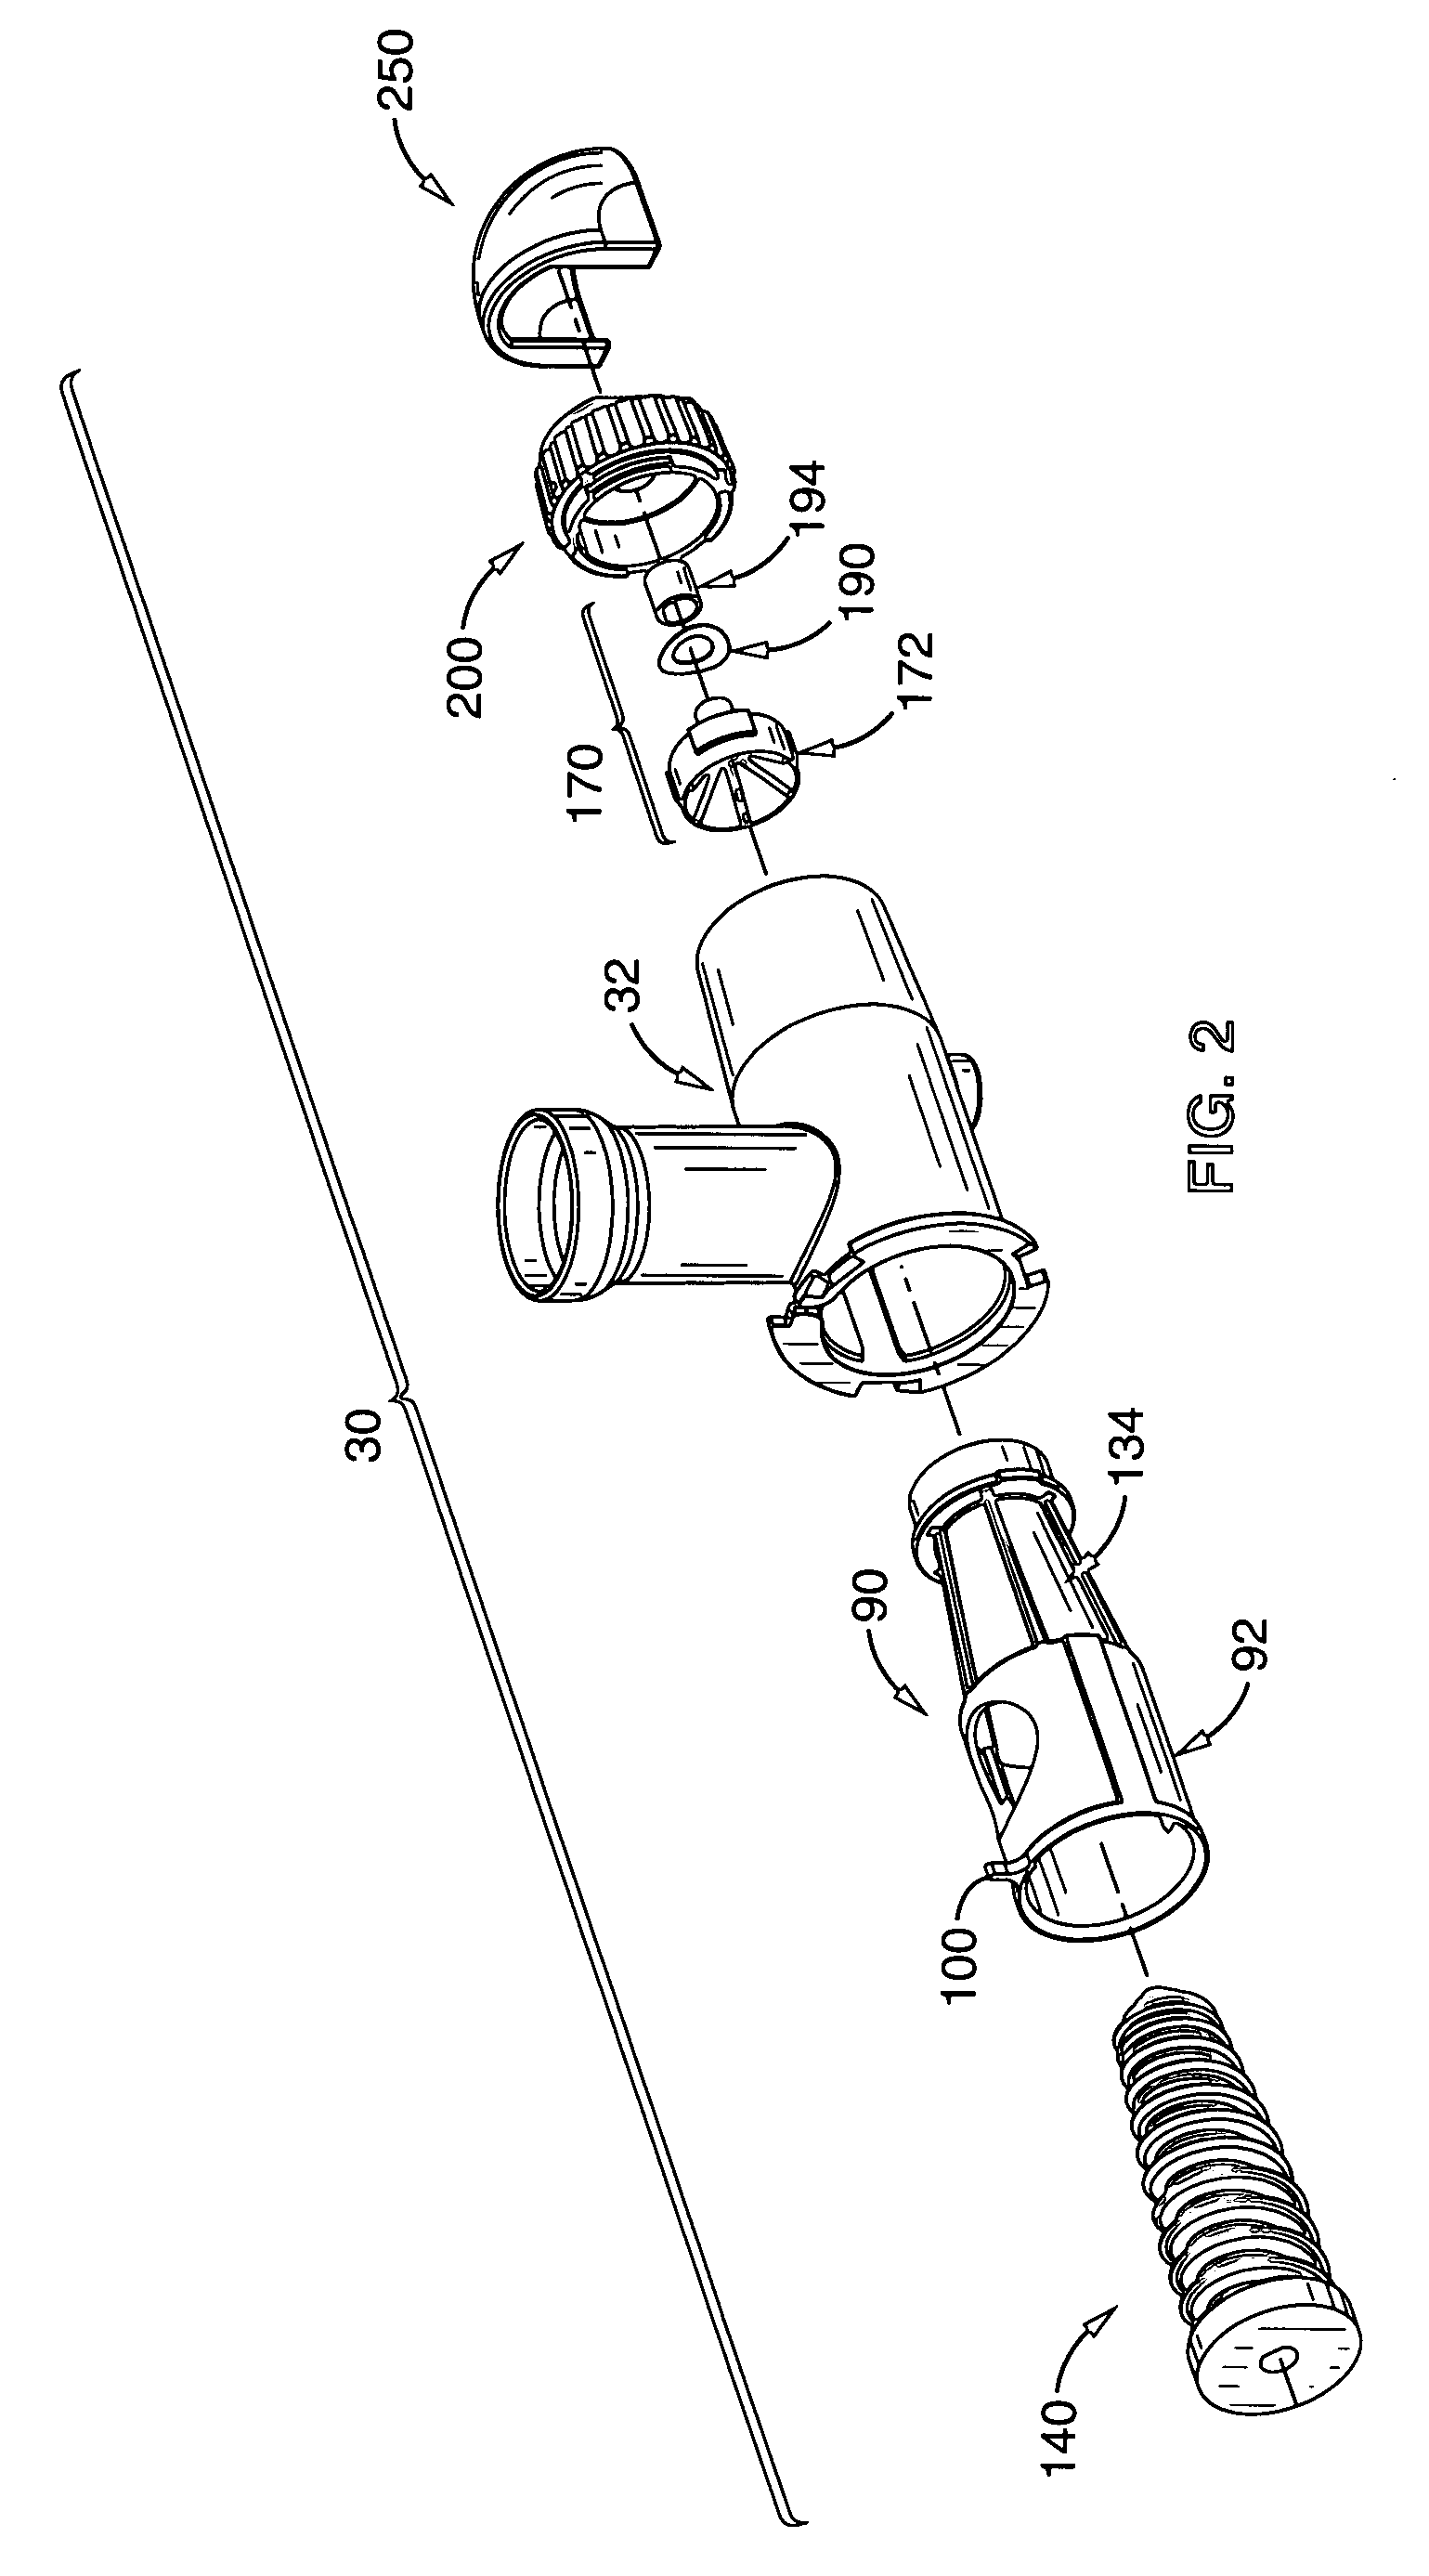 Juicer with alternate cutters